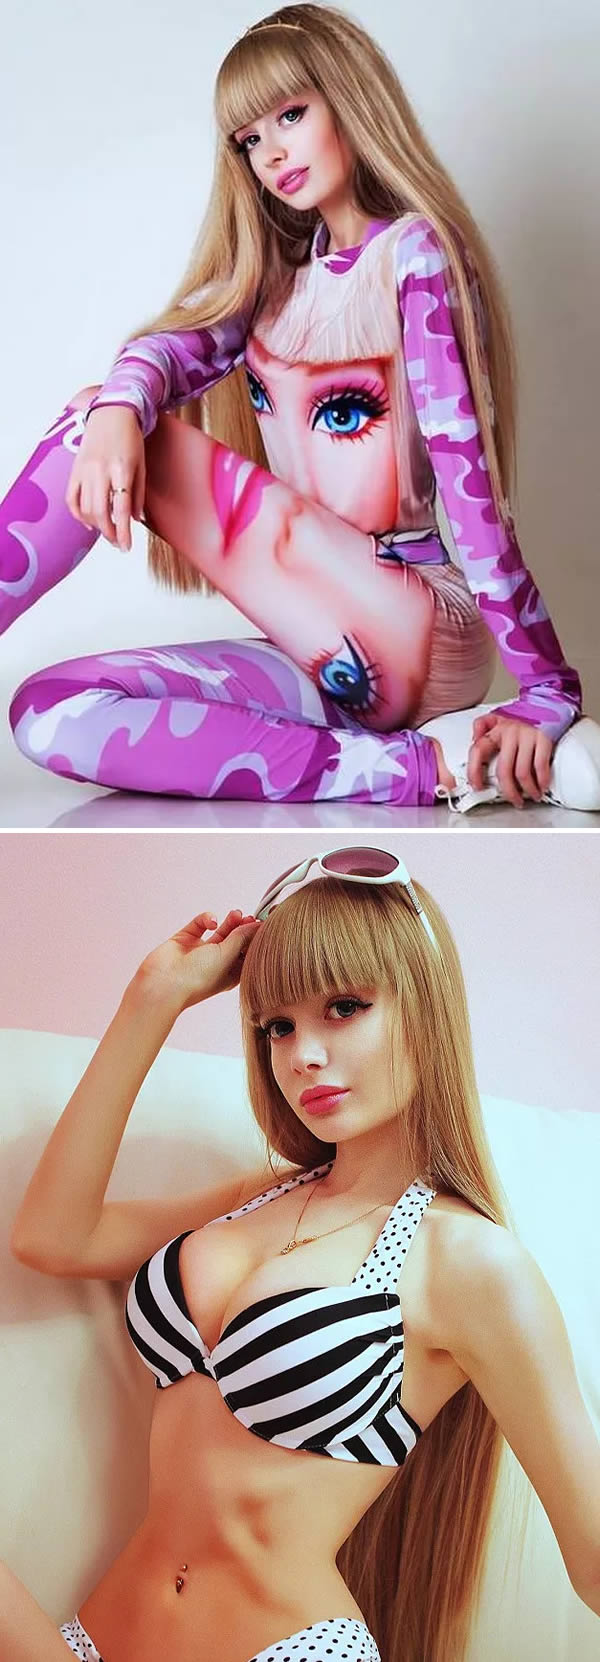 Meet Angelica Kenova, the new "Human Barbie" in town, who not only looks likes like a living doll, but is often treated like one. Angelica, 26, from Moscow, Russia, still lives with her parents and has never had a boyfriend.

She has been dressing up as Barbie since birth and is only allowed to go on dates if her mother, Natalia, accompanies her. Angelica—who claims to be a model, child psychologist and ballet dancer—regularly poses for half-naked photos with her parents' approval.